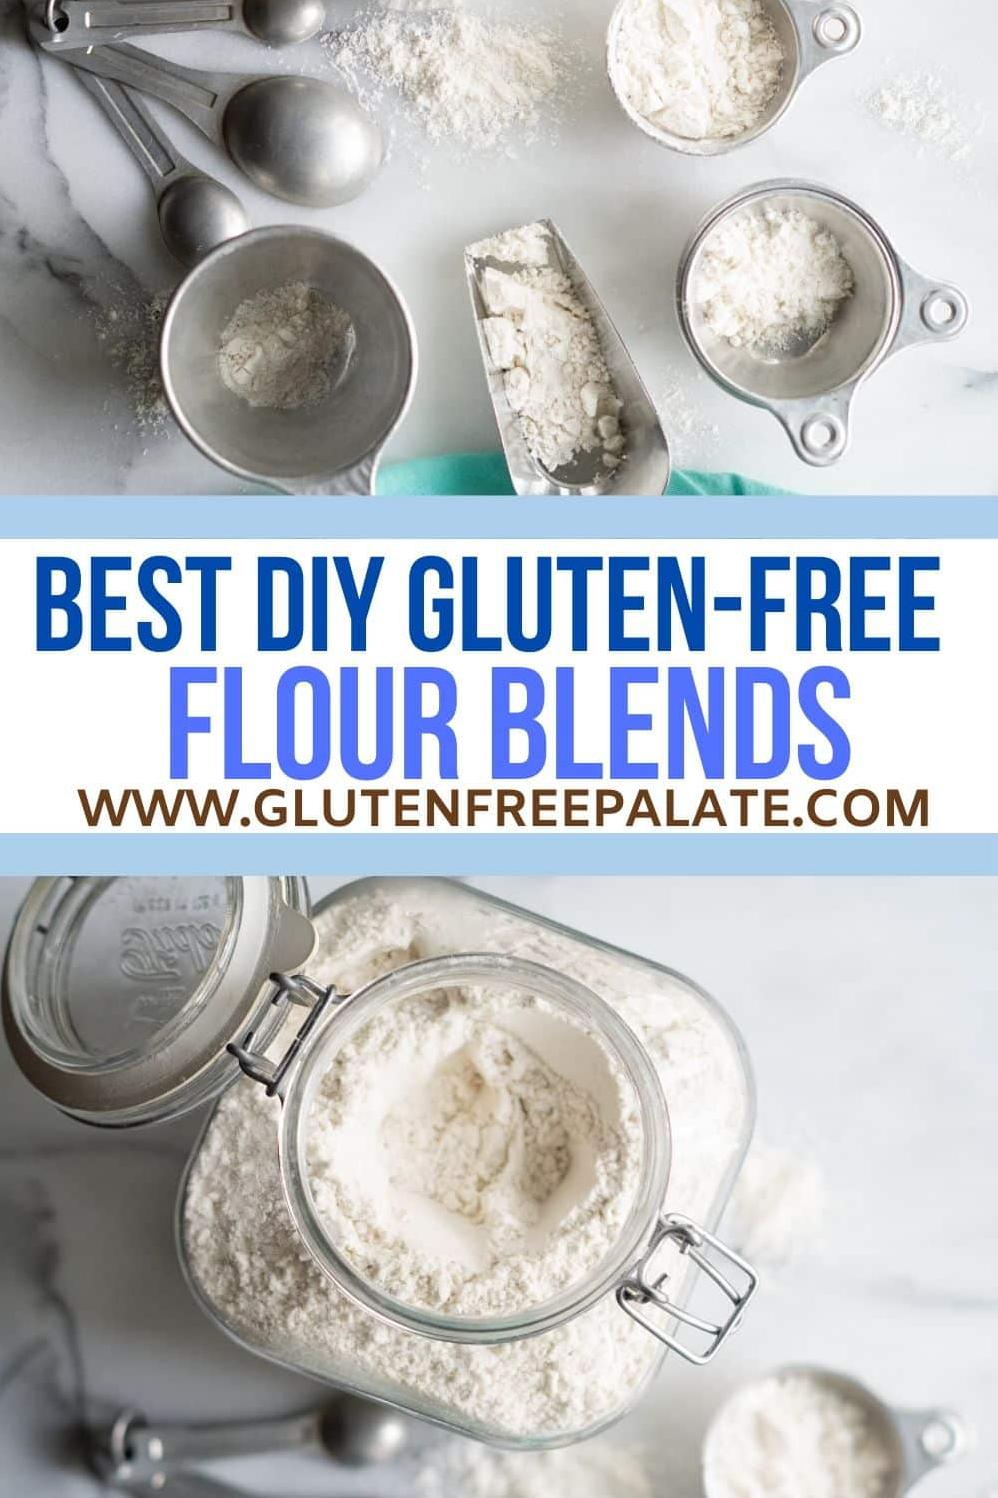  Whip up gluten-free baked goods with ease